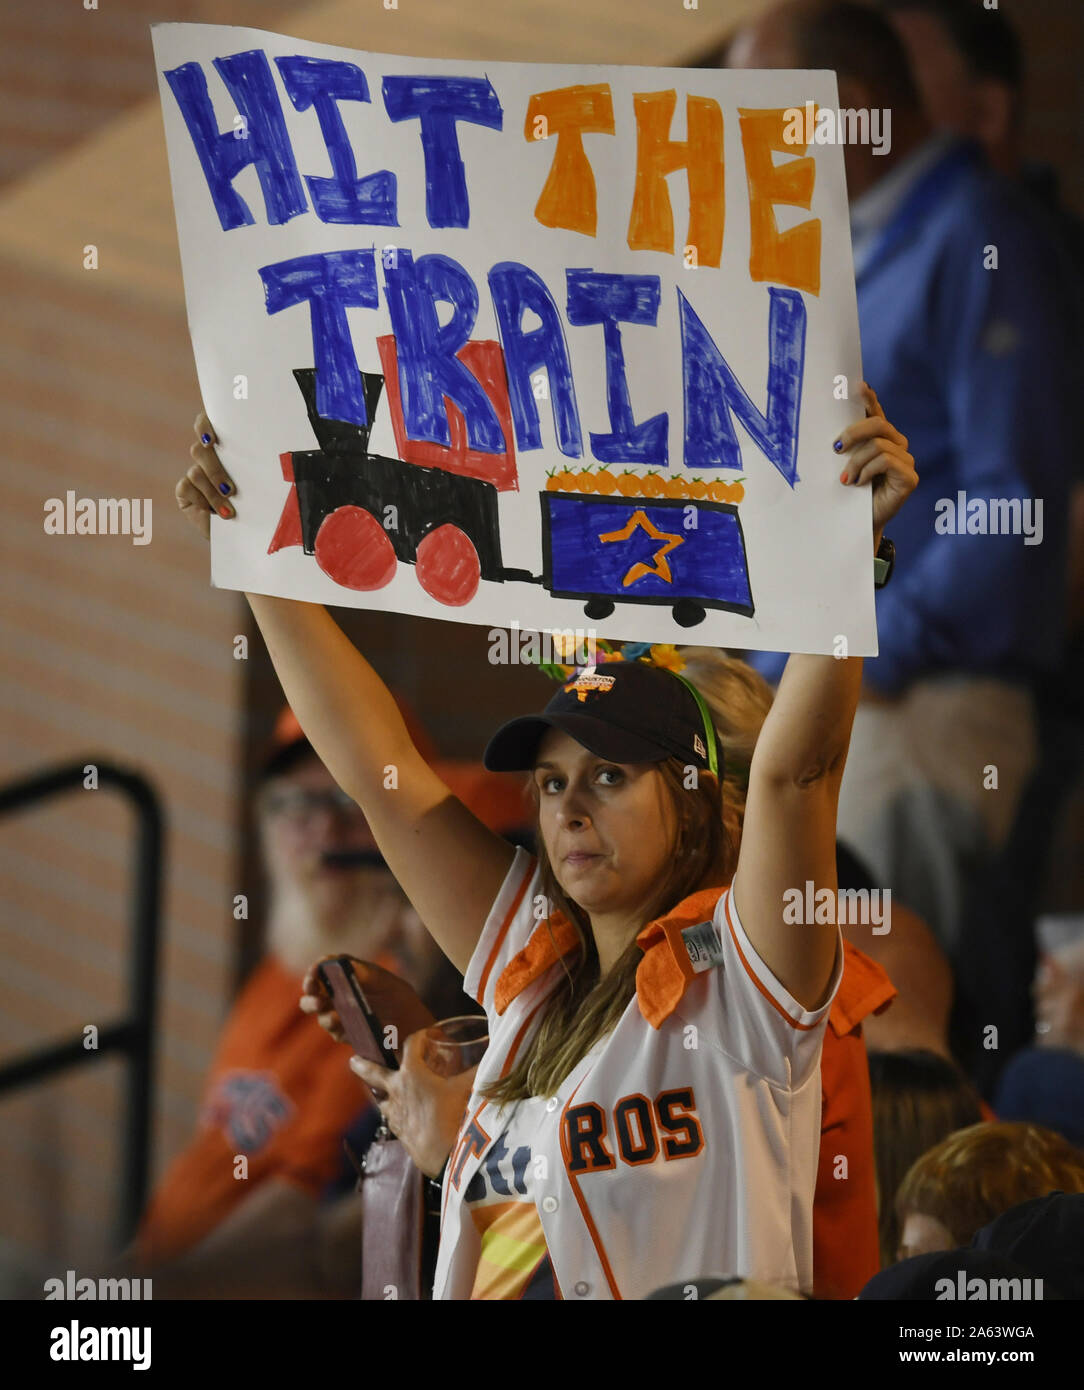 Houston, United States. 23rd Oct, 2019. A fan holds up a sign during the first inning of Game 2 of the World Series with the Washington Nationals against the Houston Astros at Minute Maid Park in Houston, Texas on Wednesday, October 23, 2019. The Nationals lead the best-of-seven series 1-0. Photo by Trask Smith/UPI Credit: UPI/Alamy Live News Stock Photo